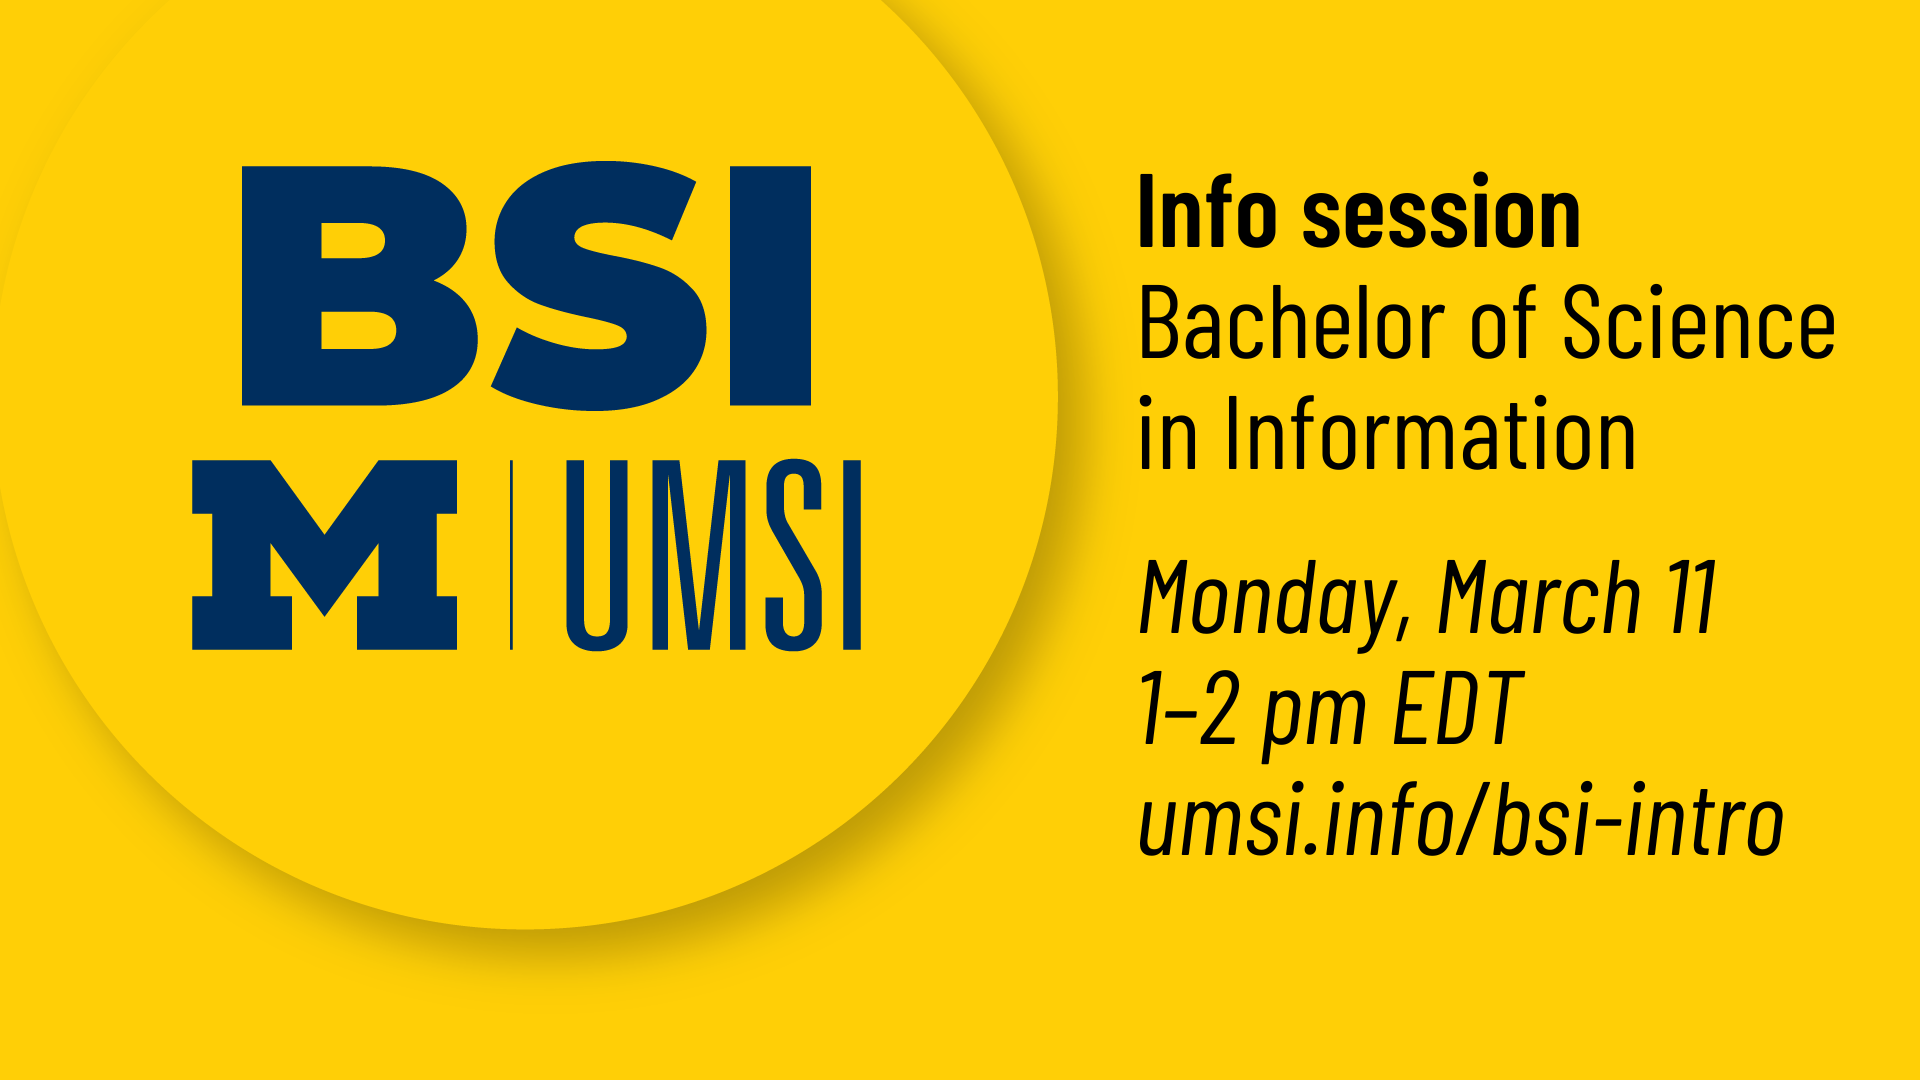 “UMSI BSI info session. Bachelor of Science in Information. Monday, March 11. 1-2 pm EDT. umsi.info/bsi-intro.”